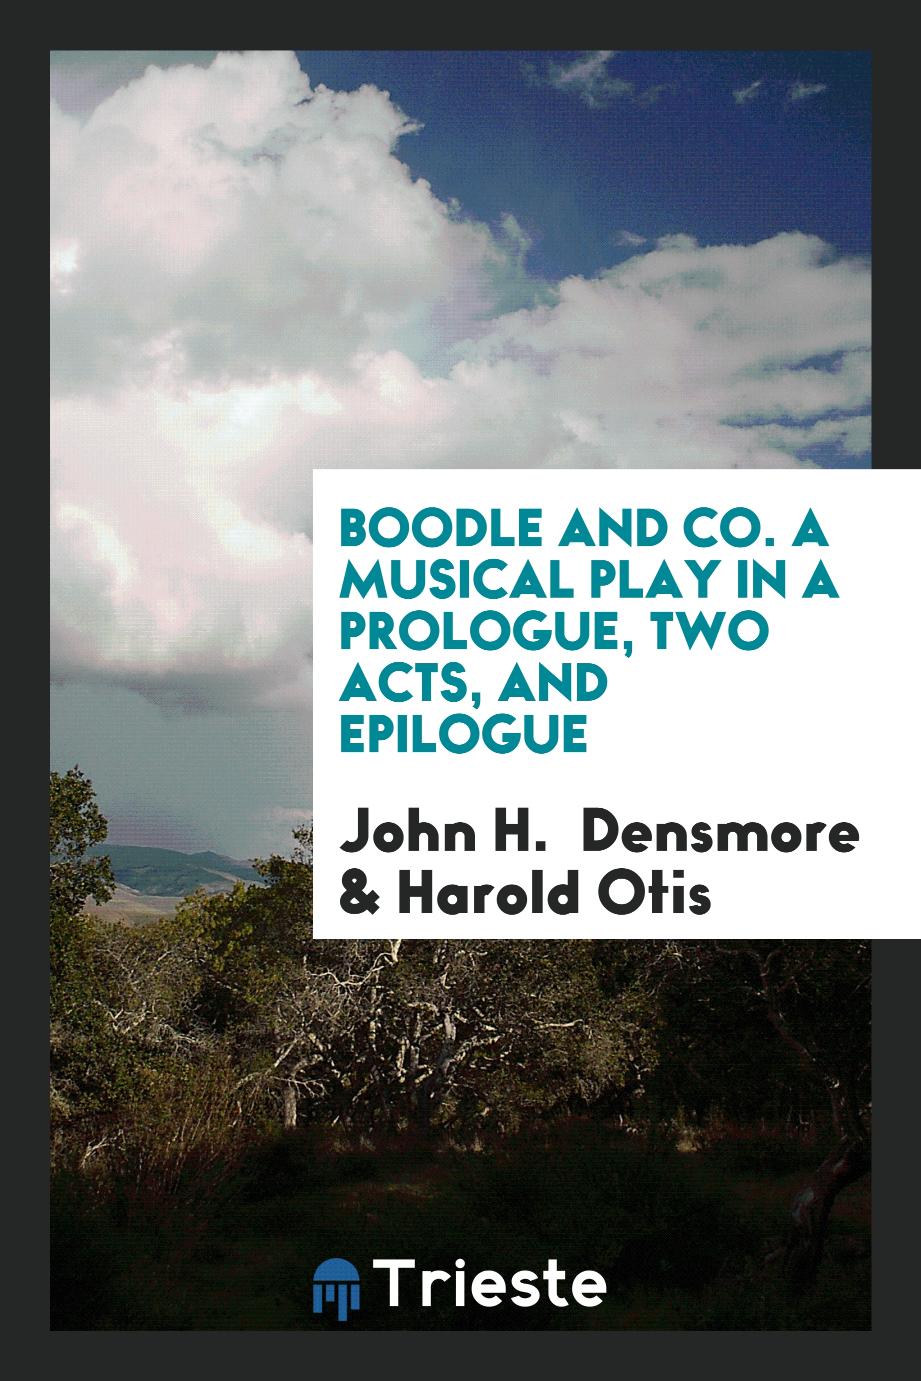 Boodle and Co. A Musical Play in a Prologue, Two Acts, and Epilogue